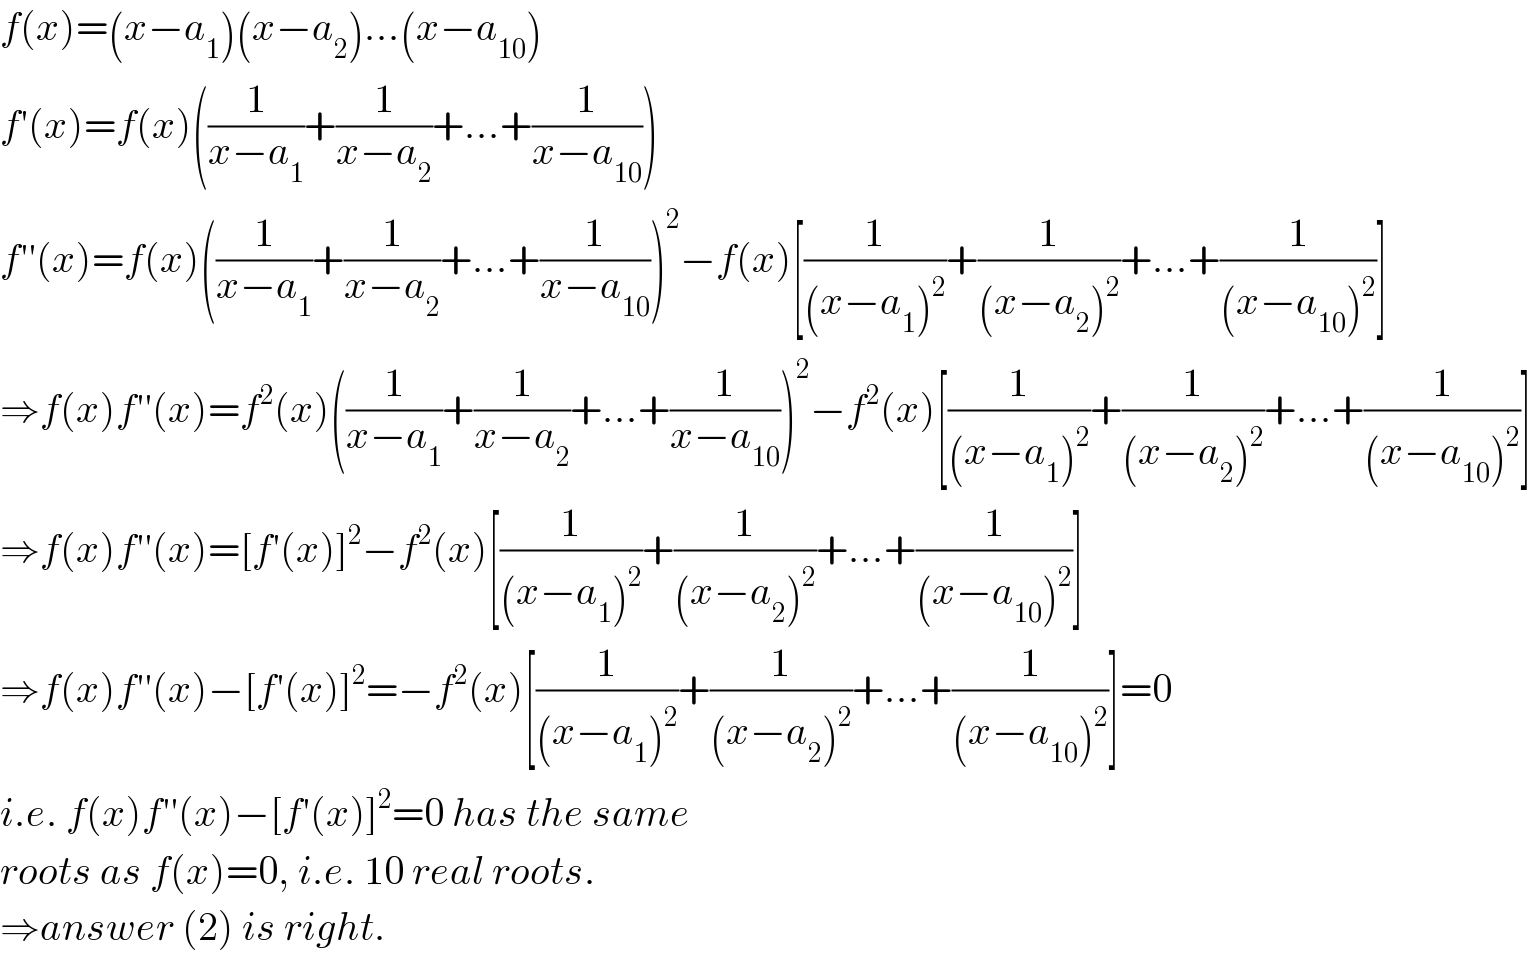 f(x)=(x−a_1 )(x−a_2 )...(x−a_(10) )  f′(x)=f(x)((1/(x−a_1 ))+(1/(x−a_2 ))+...+(1/(x−a_(10) )))  f′′(x)=f(x)((1/(x−a_1 ))+(1/(x−a_2 ))+...+(1/(x−a_(10) )))^2 −f(x)[(1/((x−a_1 )^2 ))+(1/((x−a_2 )^2 ))+...+(1/((x−a_(10) )^2 ))]  ⇒f(x)f′′(x)=f^2 (x)((1/(x−a_1 ))+(1/(x−a_2 ))+...+(1/(x−a_(10) )))^2 −f^2 (x)[(1/((x−a_1 )^2 ))+(1/((x−a_2 )^2 ))+...+(1/((x−a_(10) )^2 ))]  ⇒f(x)f′′(x)=[f′(x)]^2 −f^2 (x)[(1/((x−a_1 )^2 ))+(1/((x−a_2 )^2 ))+...+(1/((x−a_(10) )^2 ))]  ⇒f(x)f′′(x)−[f′(x)]^2 =−f^2 (x)[(1/((x−a_1 )^2 ))+(1/((x−a_2 )^2 ))+...+(1/((x−a_(10) )^2 ))]=0  i.e. f(x)f′′(x)−[f′(x)]^2 =0 has the same  roots as f(x)=0, i.e. 10 real roots.  ⇒answer (2) is right.  